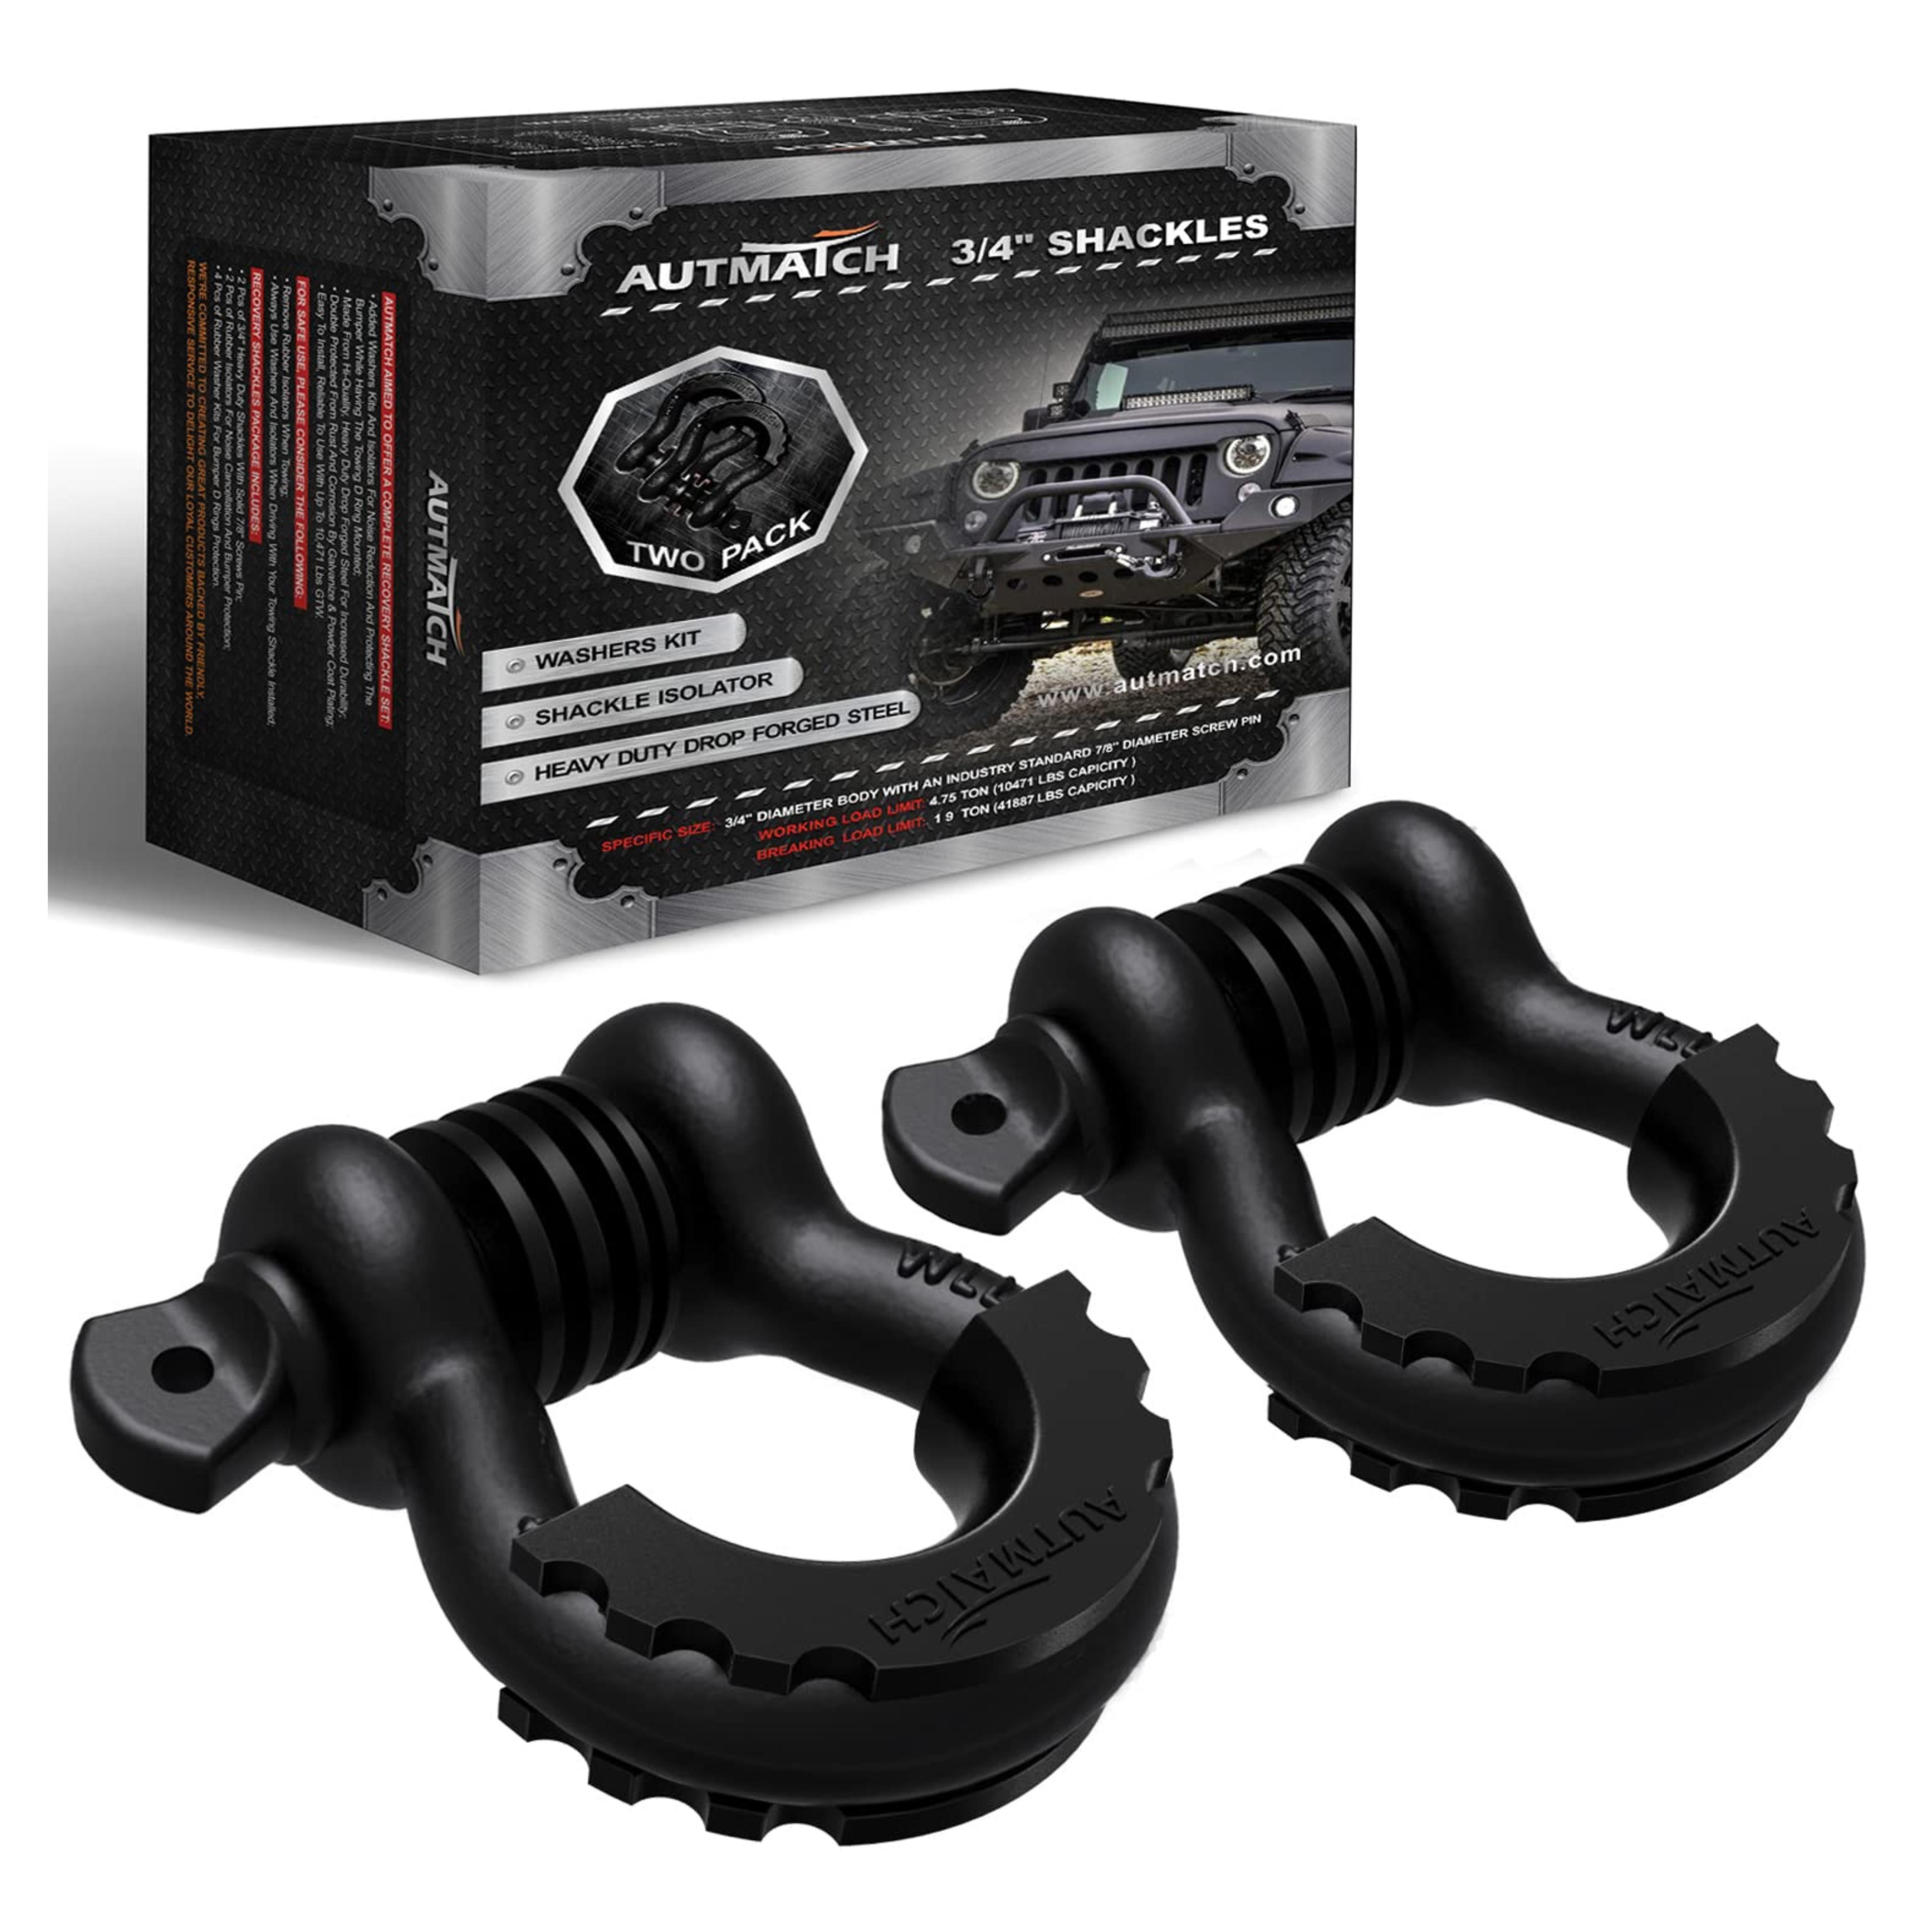 Amazon.com: AUTMATCH D Ring Shackle 3/4" Shackles (2 Pack) 41,887Ibs Break Strength with 7/8" Screw Pin and Shackle Isolator Washers Kit for Tow Strap Winch Off Road Vehicle Recovery, Matte Black : Automotive